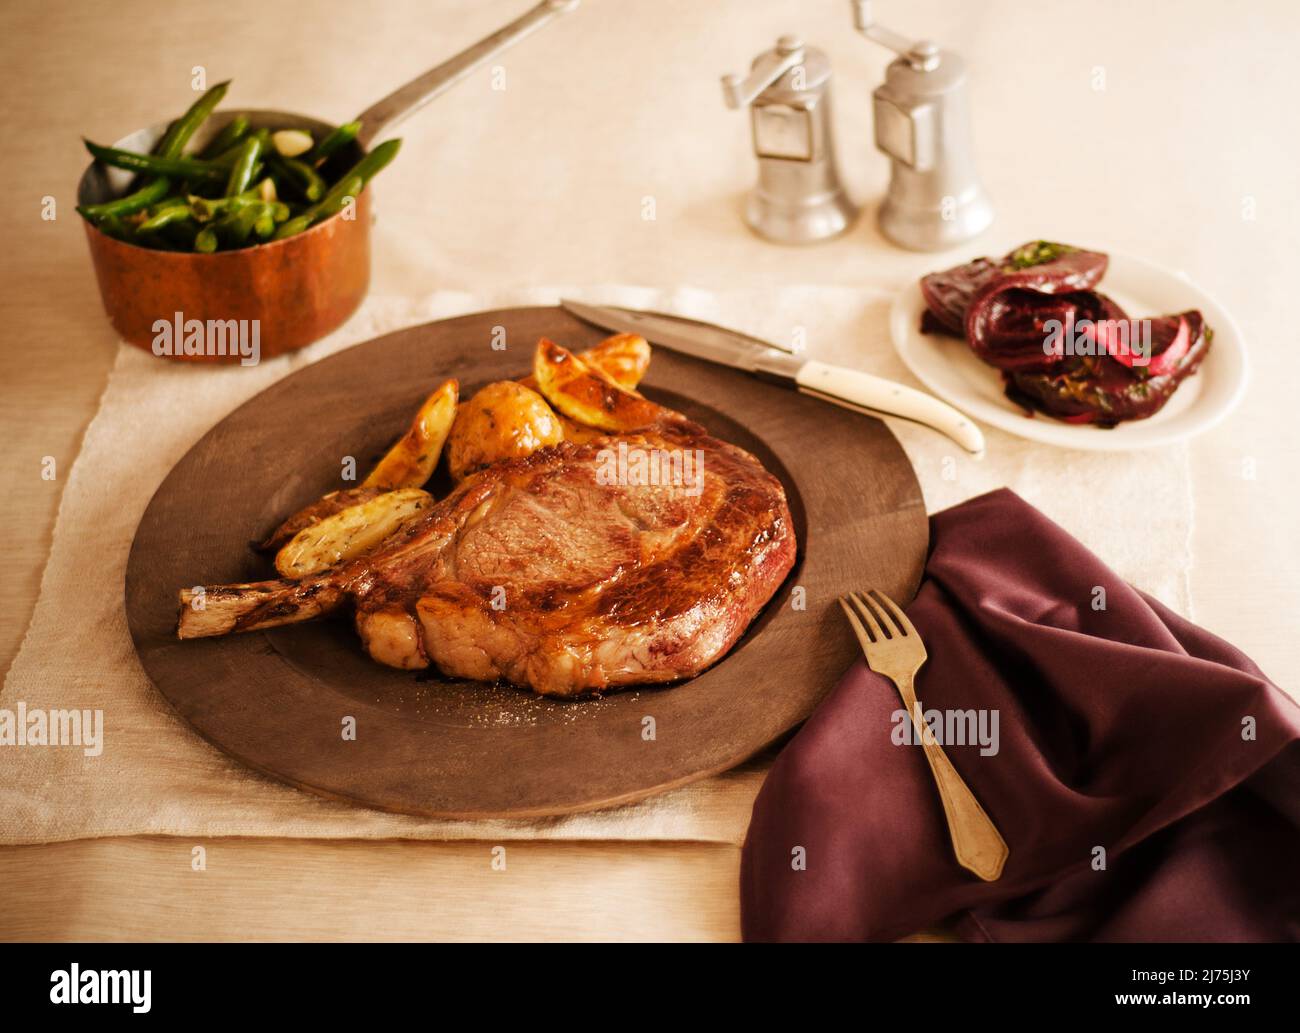 Dry Aged Frenched Prime Rib Chops with Green Beans, Roasted Potatoes and Beets Stock Photo